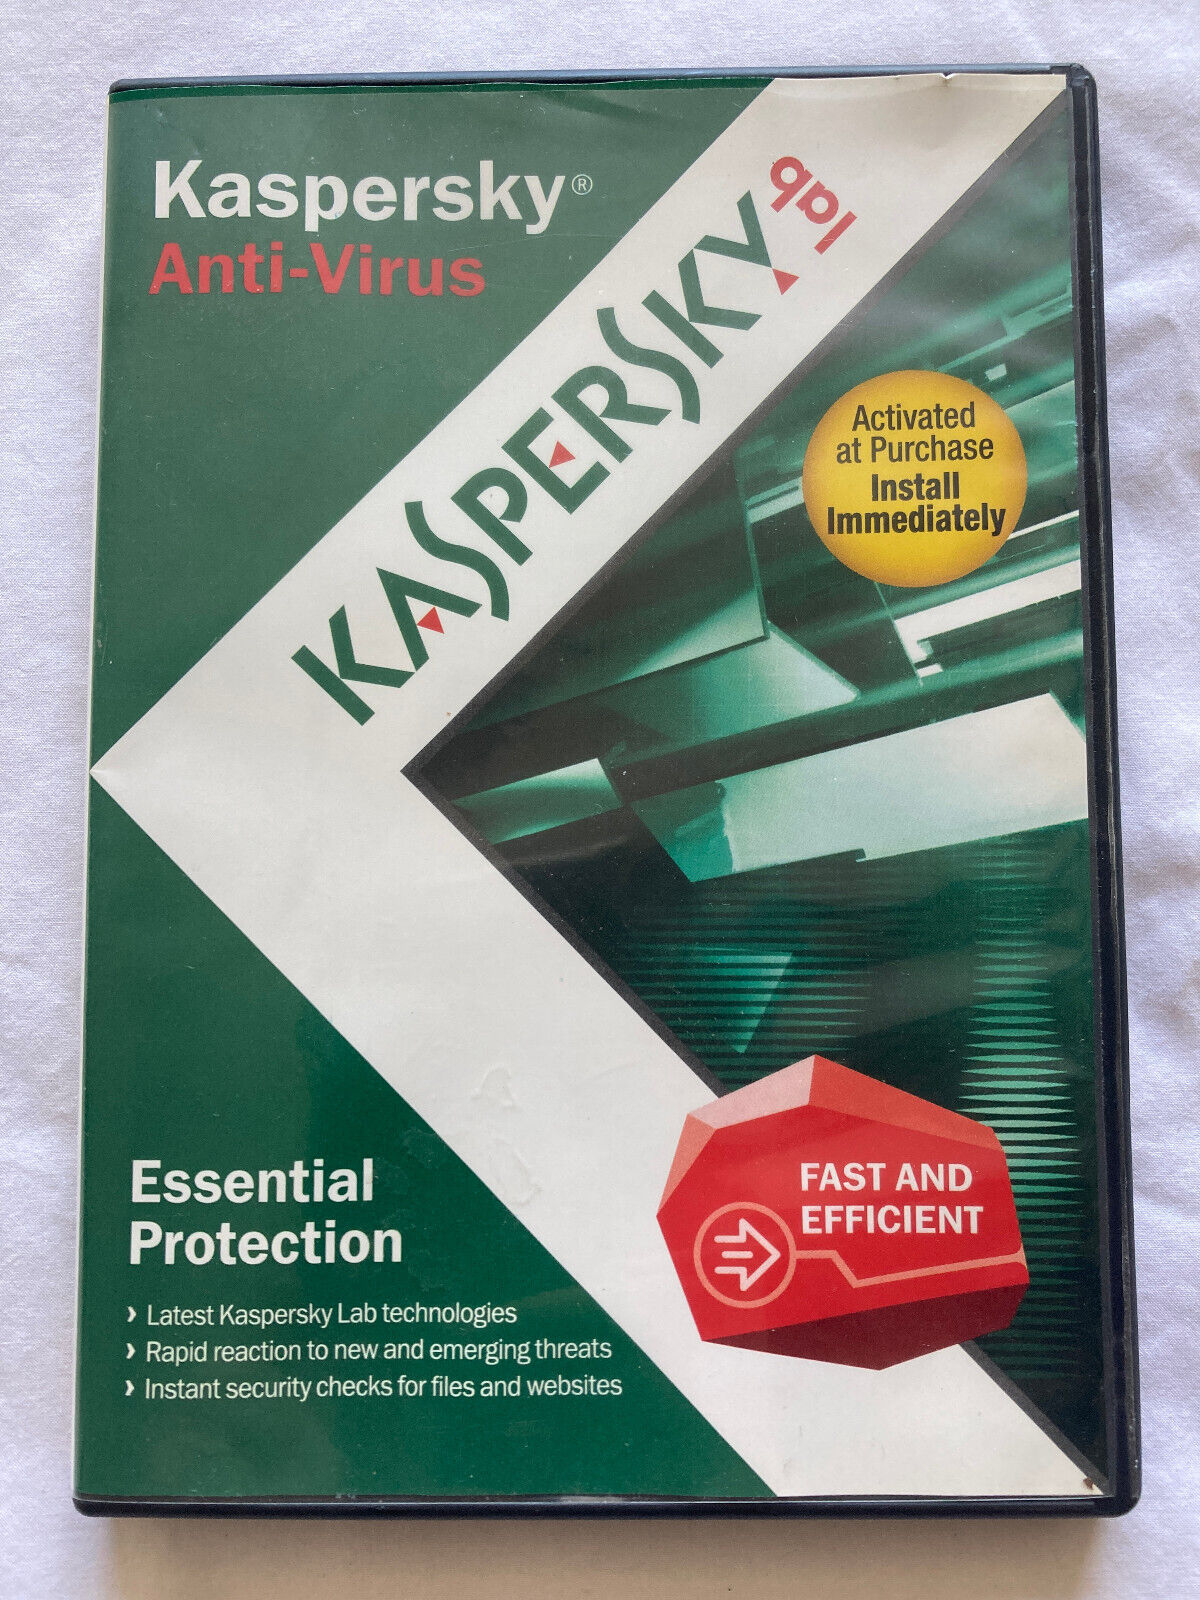 Kaspersky Lab Essential Protection PC Anti-Virus Software CD VGC DISC & Case